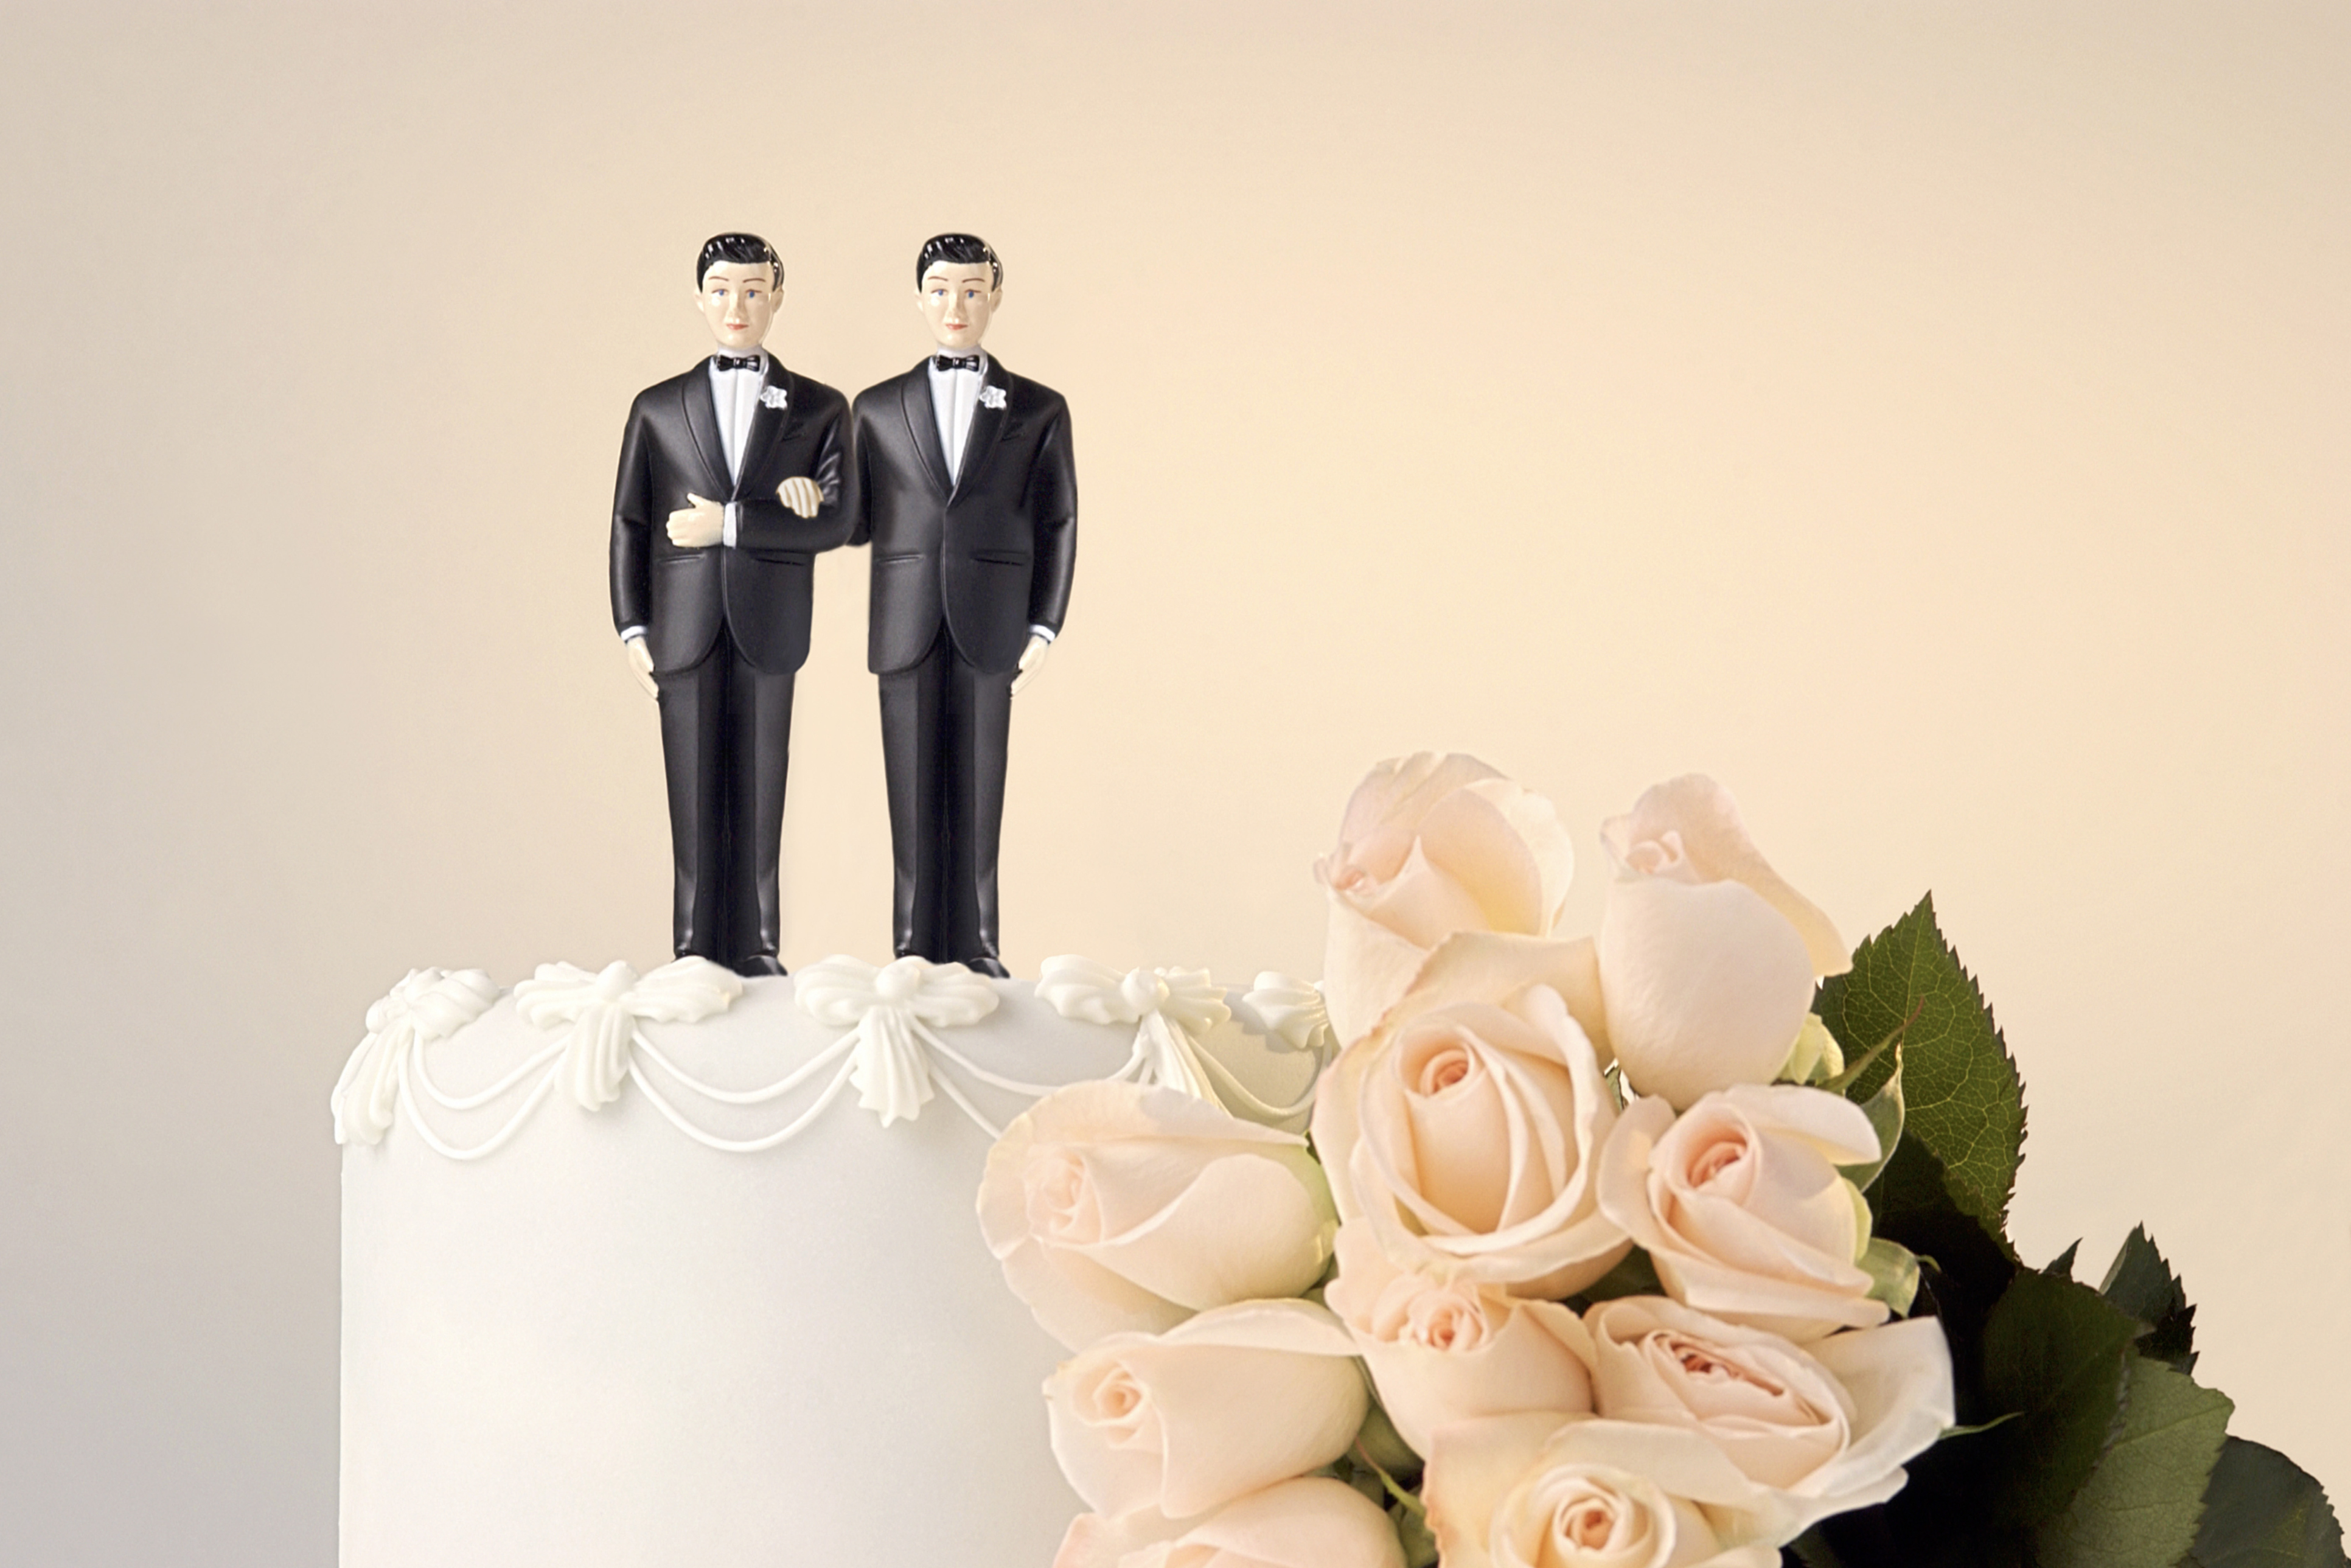 Wedding cake topper with two people in suits, flowers